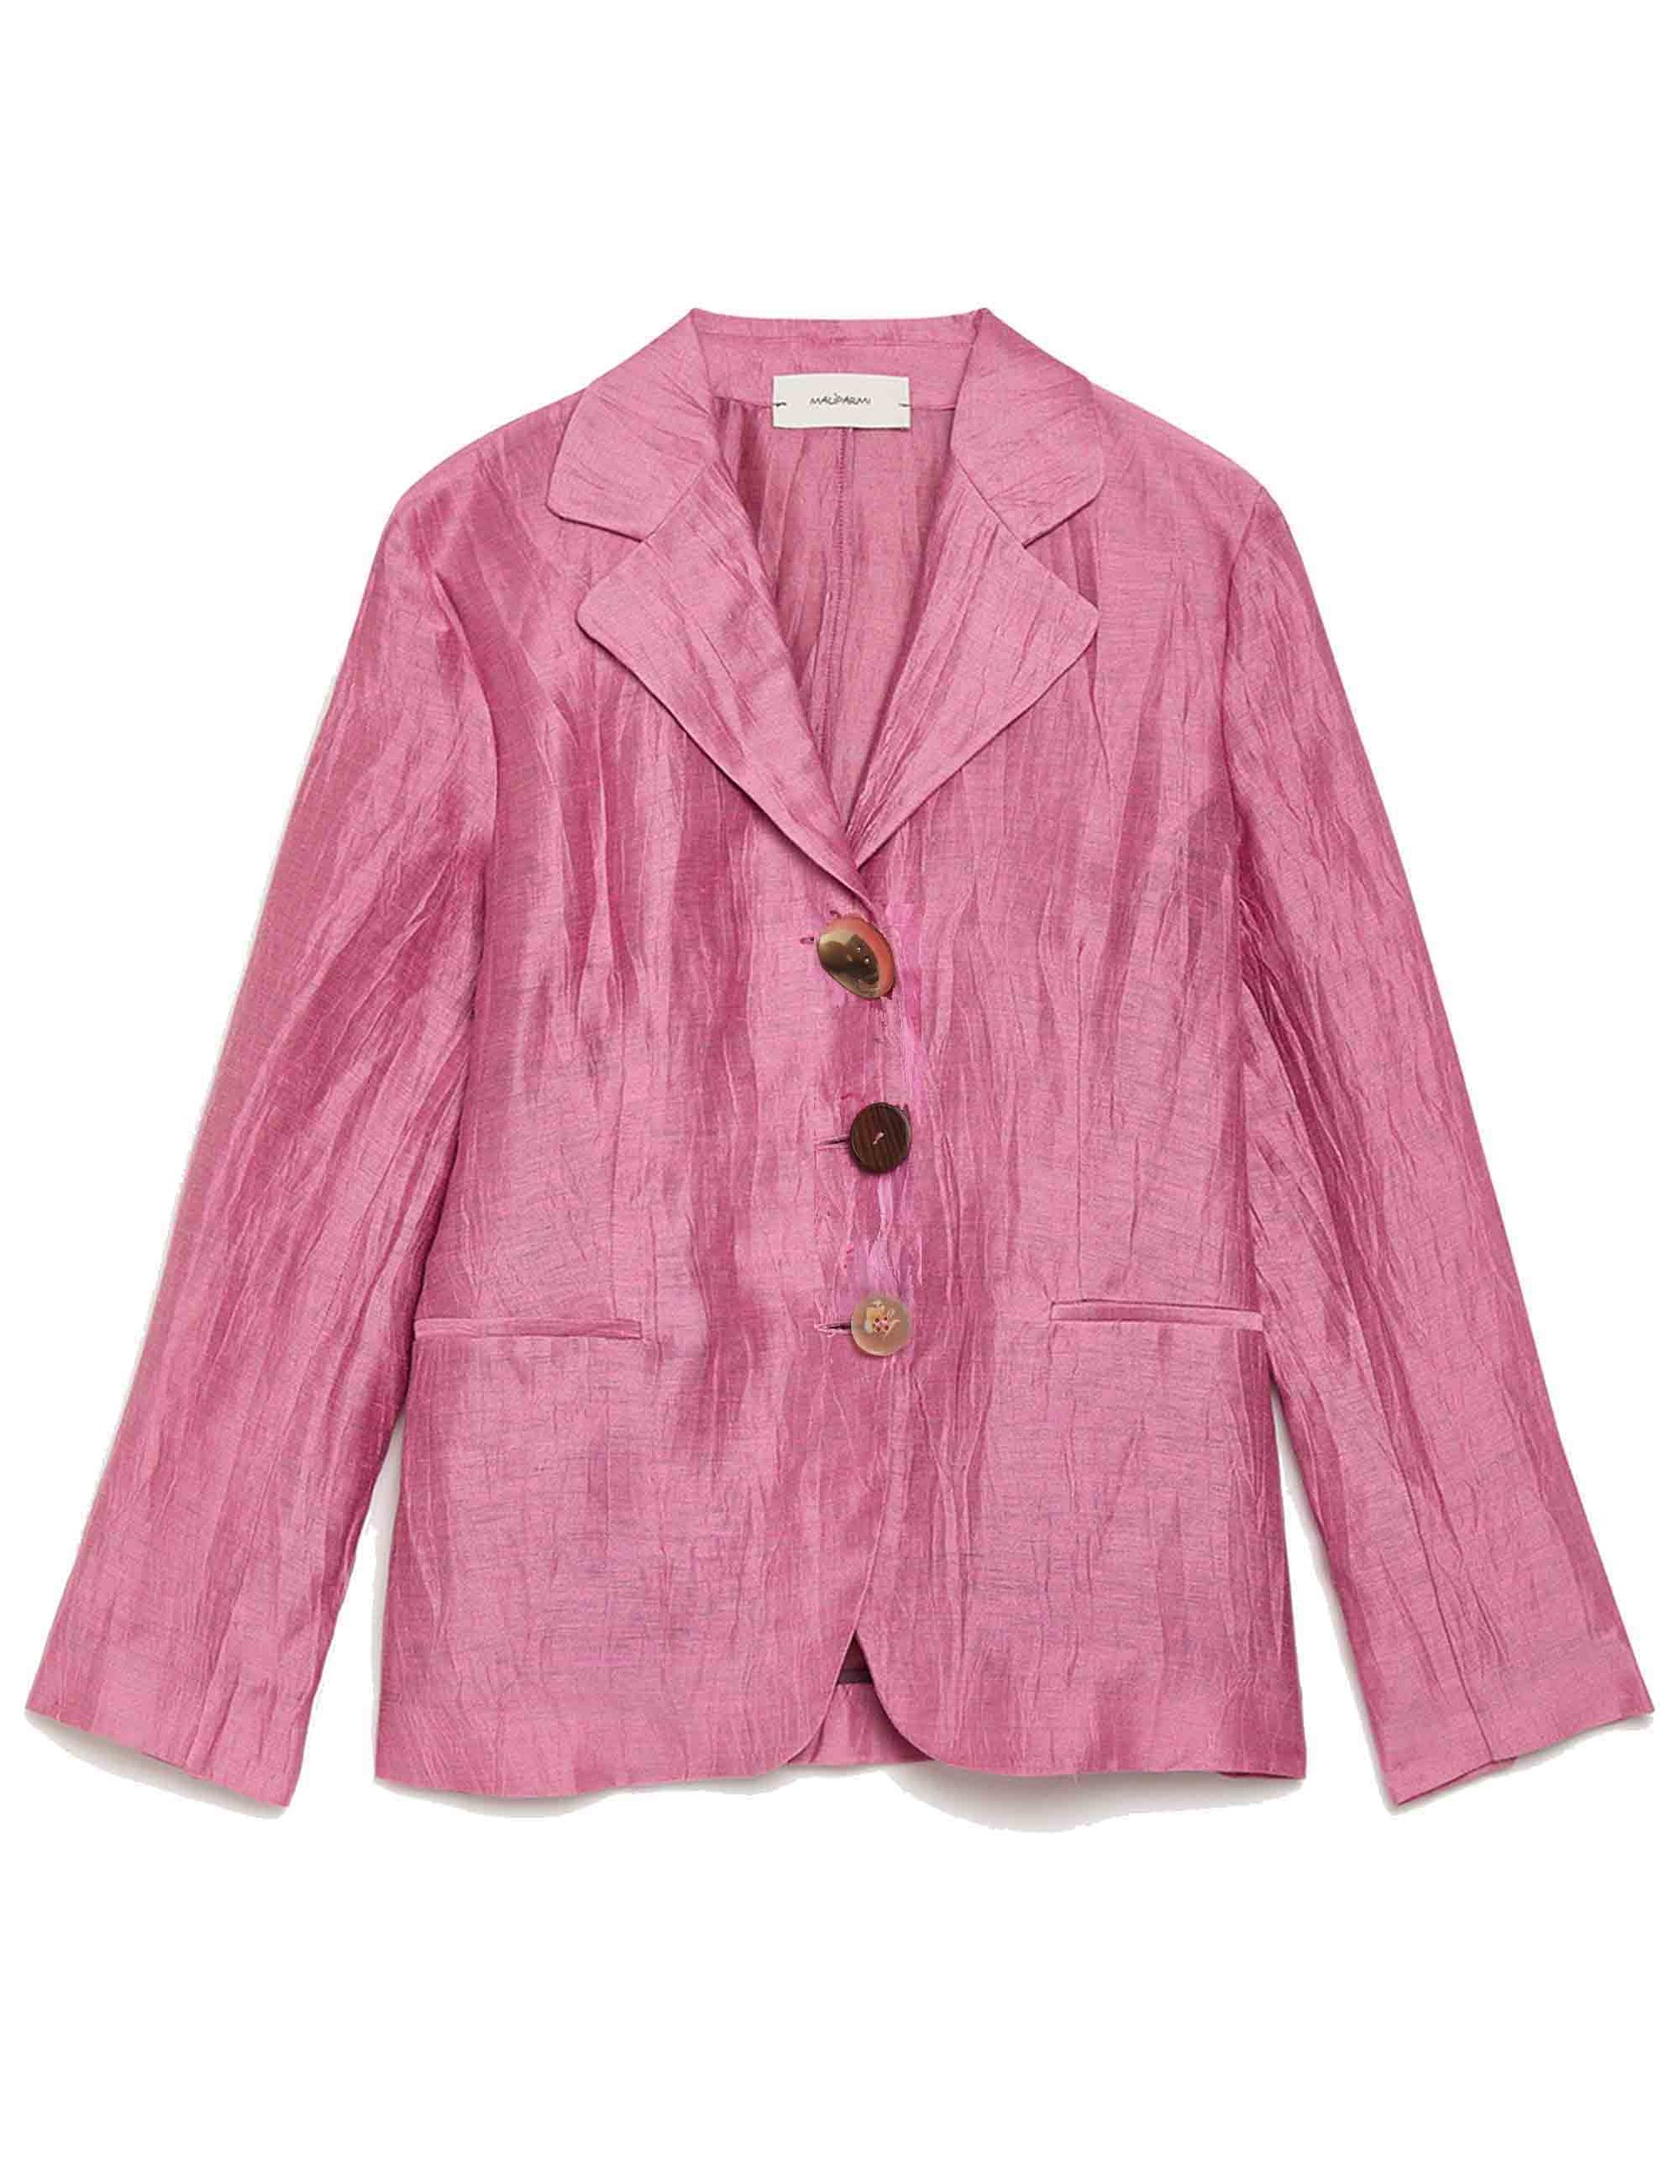 Froisse women's single-breasted jackets in pink linen